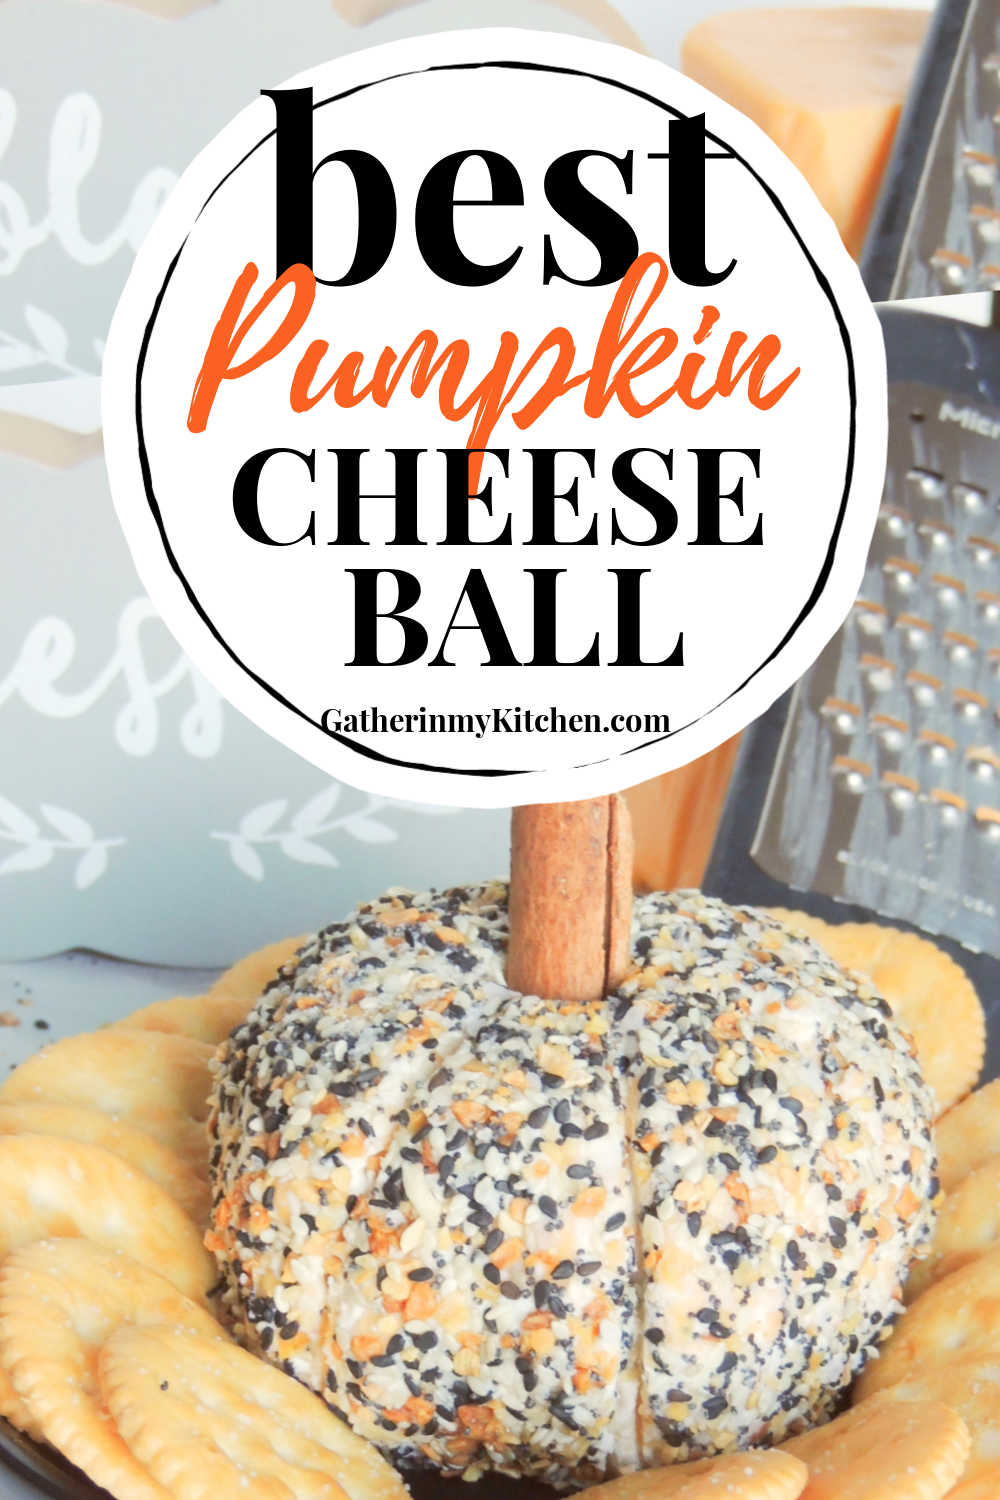 Pin image: top says "Best Pumpkin Cheese Ball" and below has a pic of the pumpkin cheese ball on a plate with cracker surrounding it.